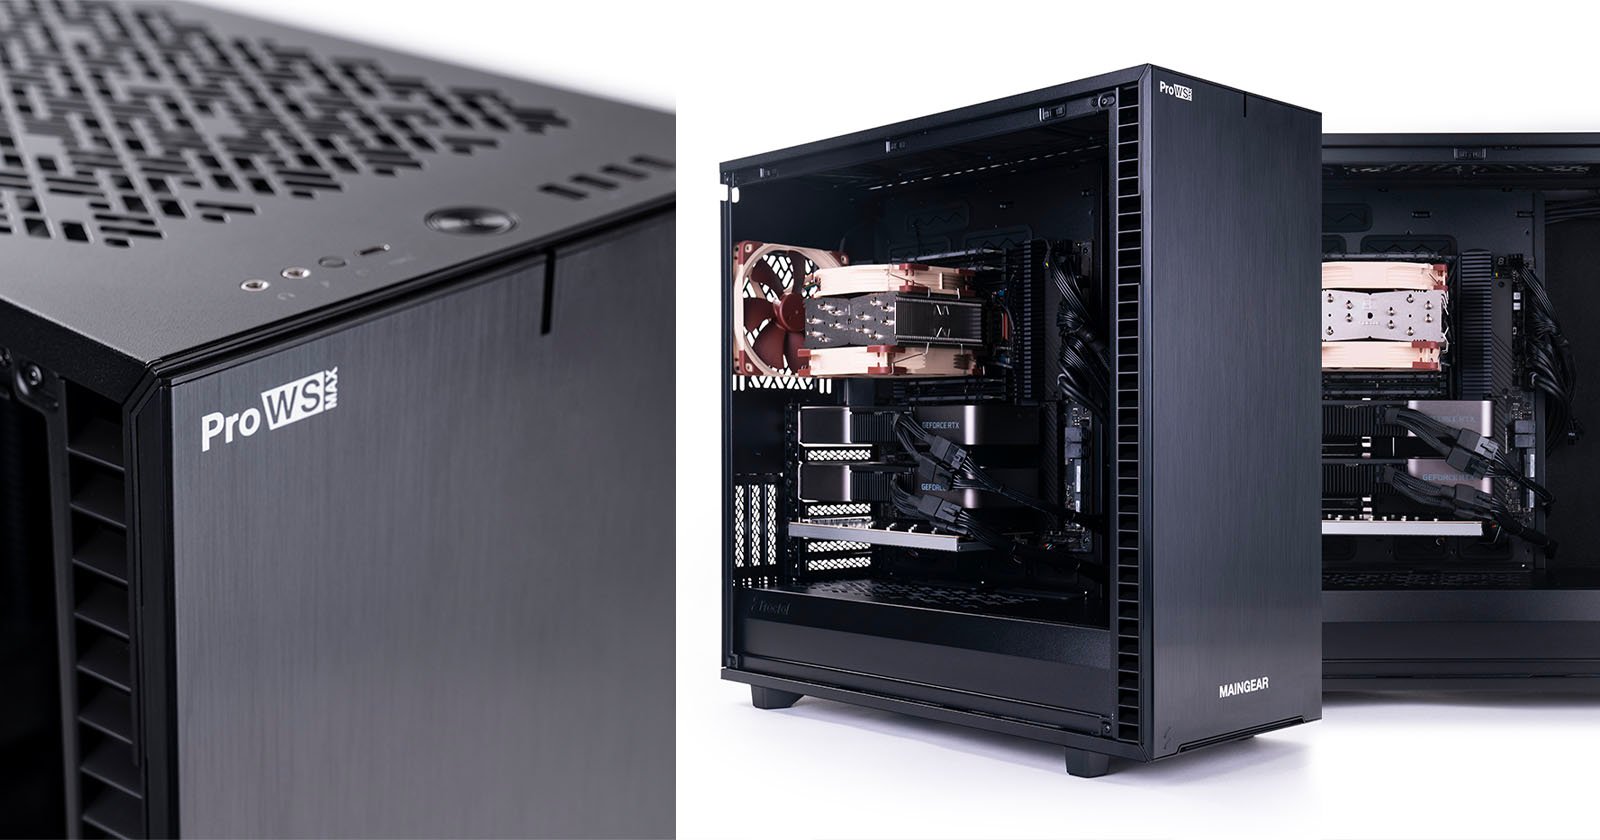 MainGears New Line of Pre-Built PCs is Made for Photo and Video Editors